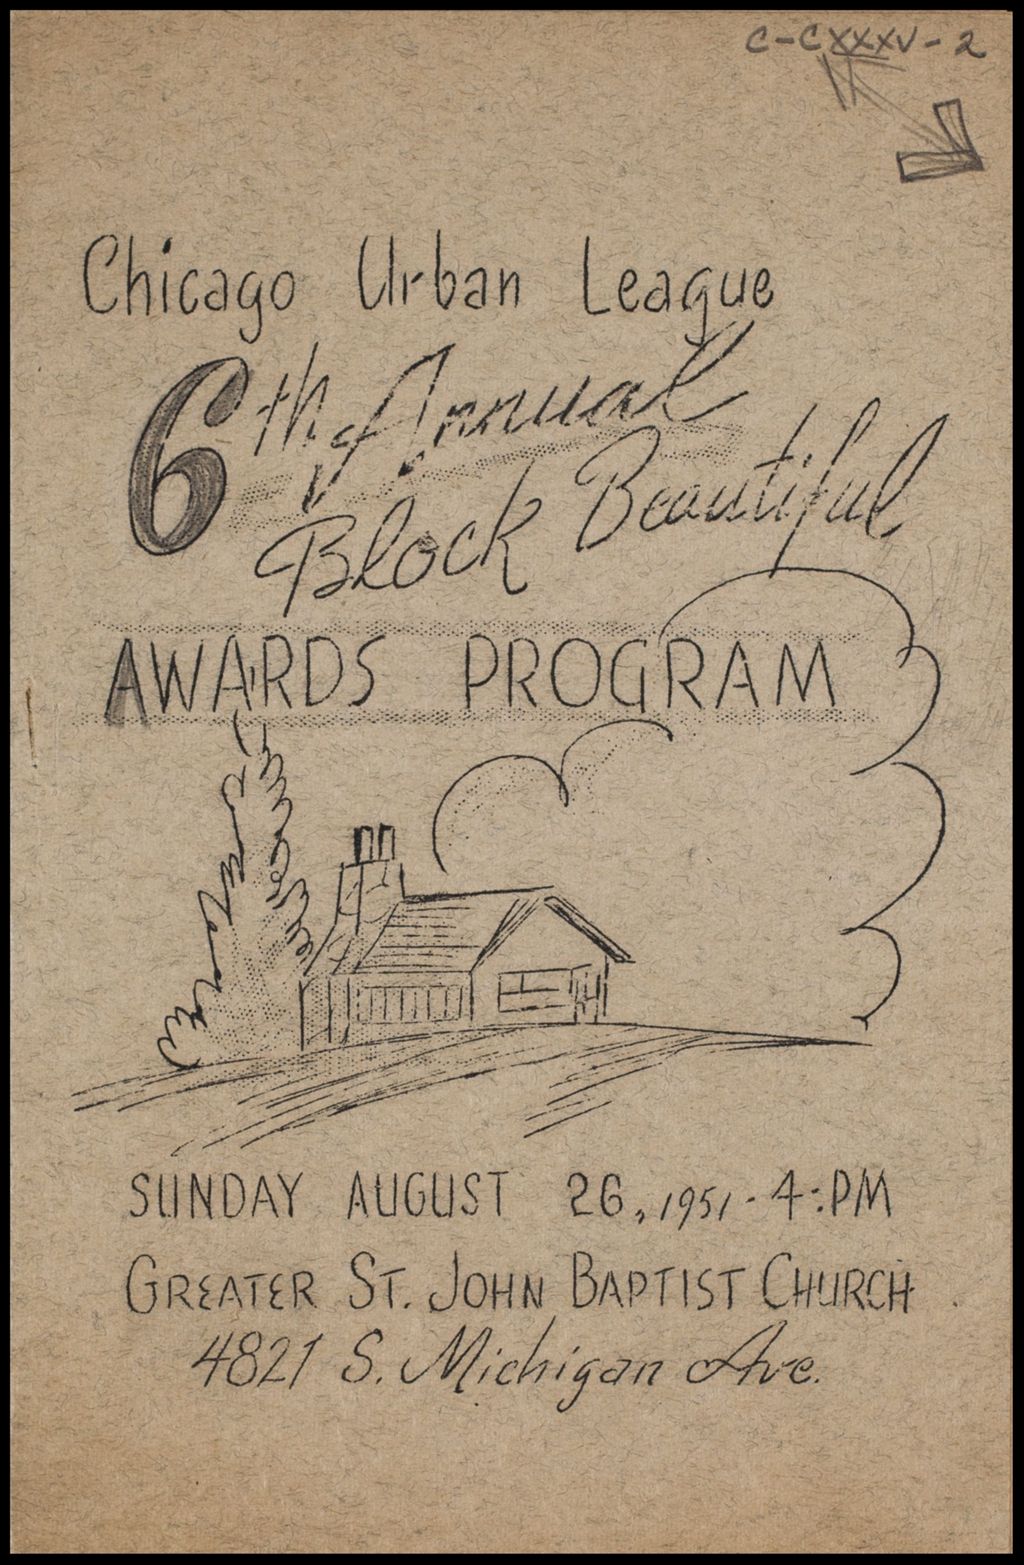 Miniature of Block Clubs - Announcements of Special Events, 1951-1955 (Folder II-2310)